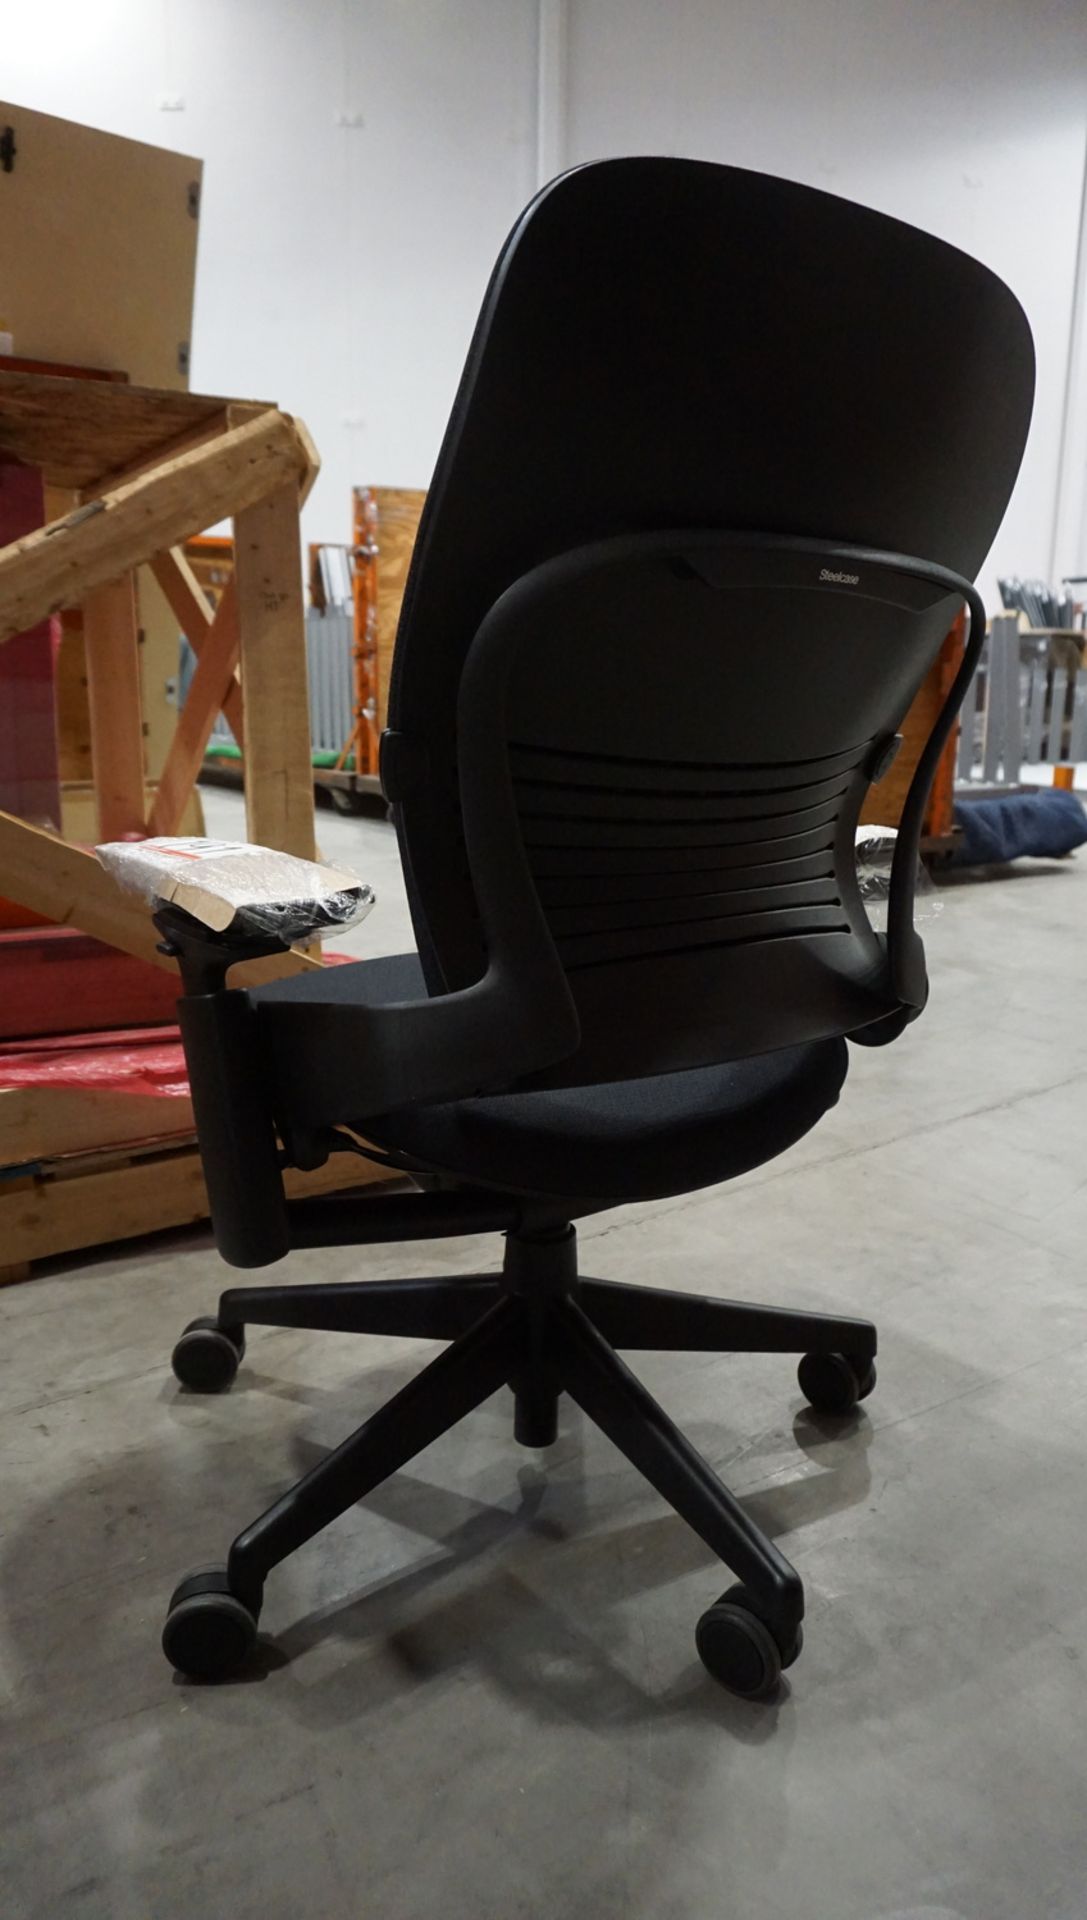 STEELCASE LEAP CHAIR W/ BLACK FABRIC & 4-WAY ADJ ARMS - Image 2 of 2